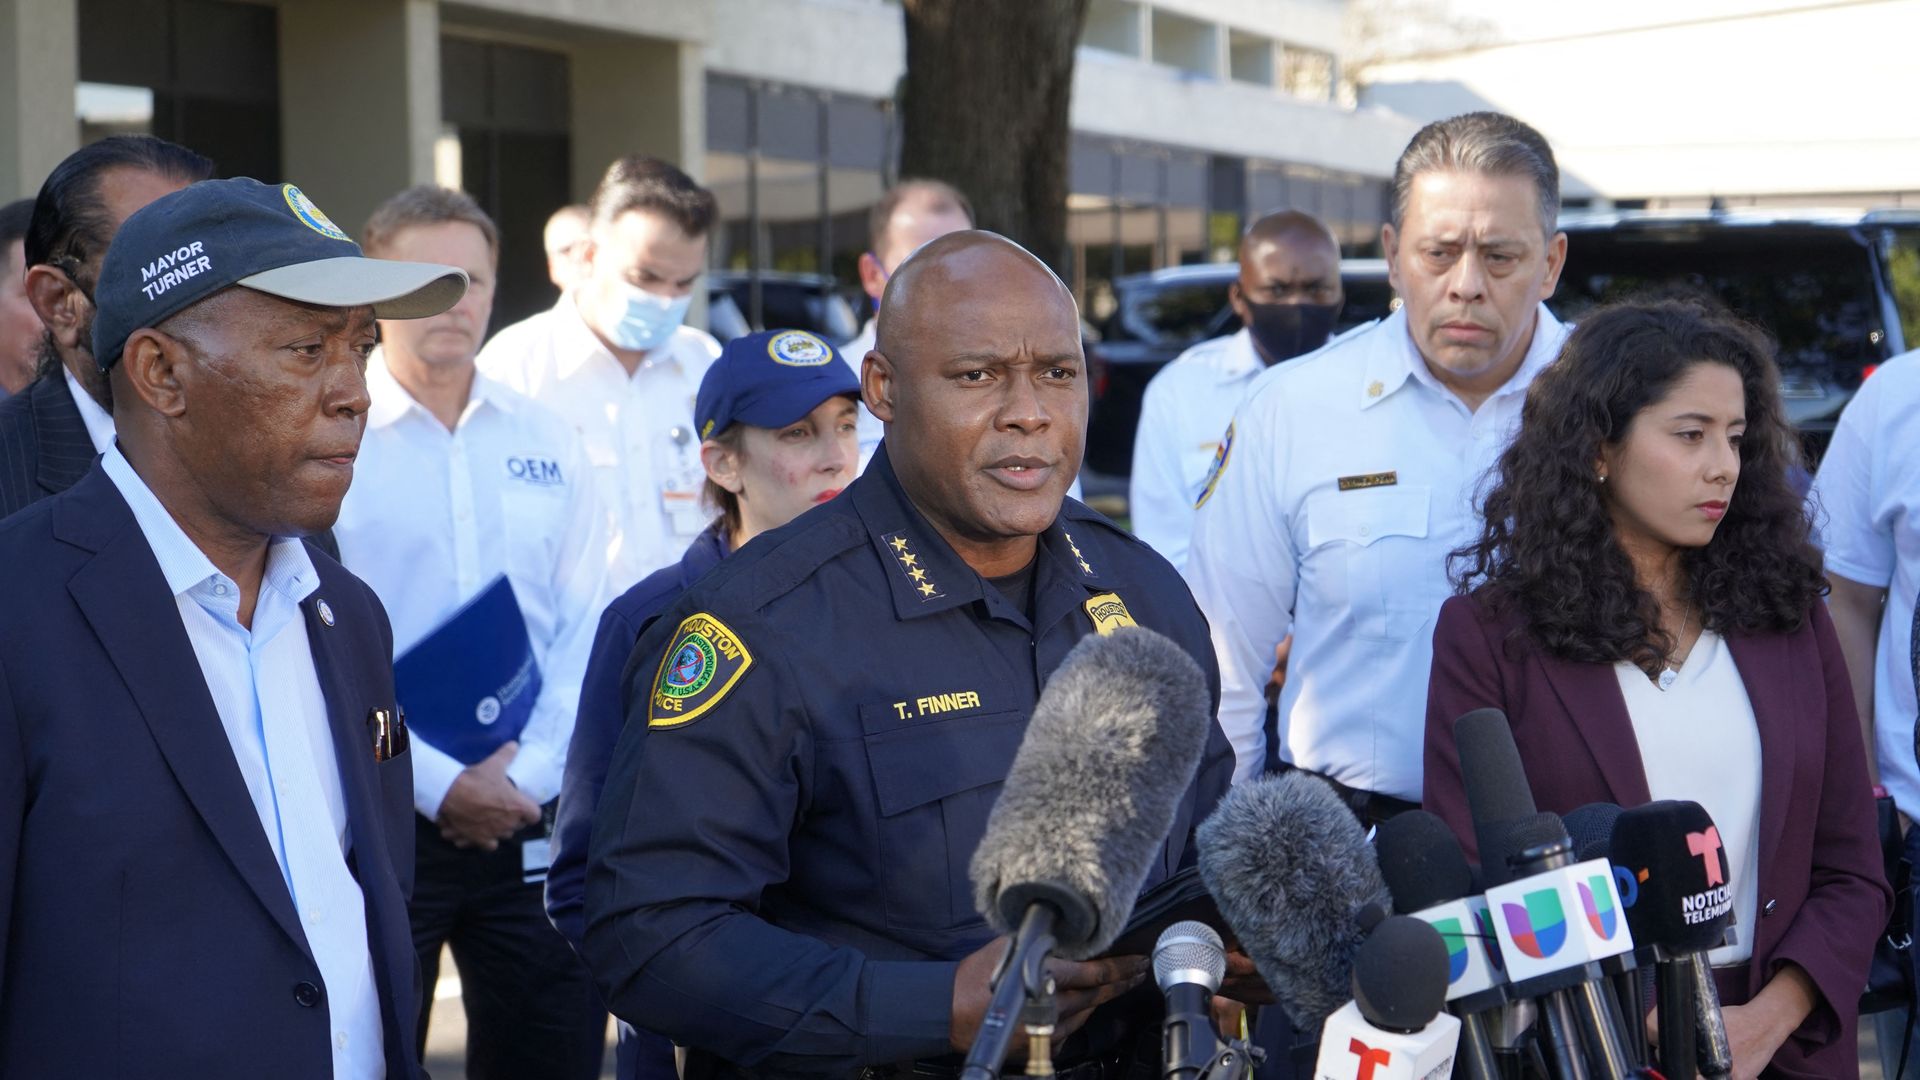 Houston police chief Troy Finner speaks at a press conference the day after a concert accident killed 8 people.